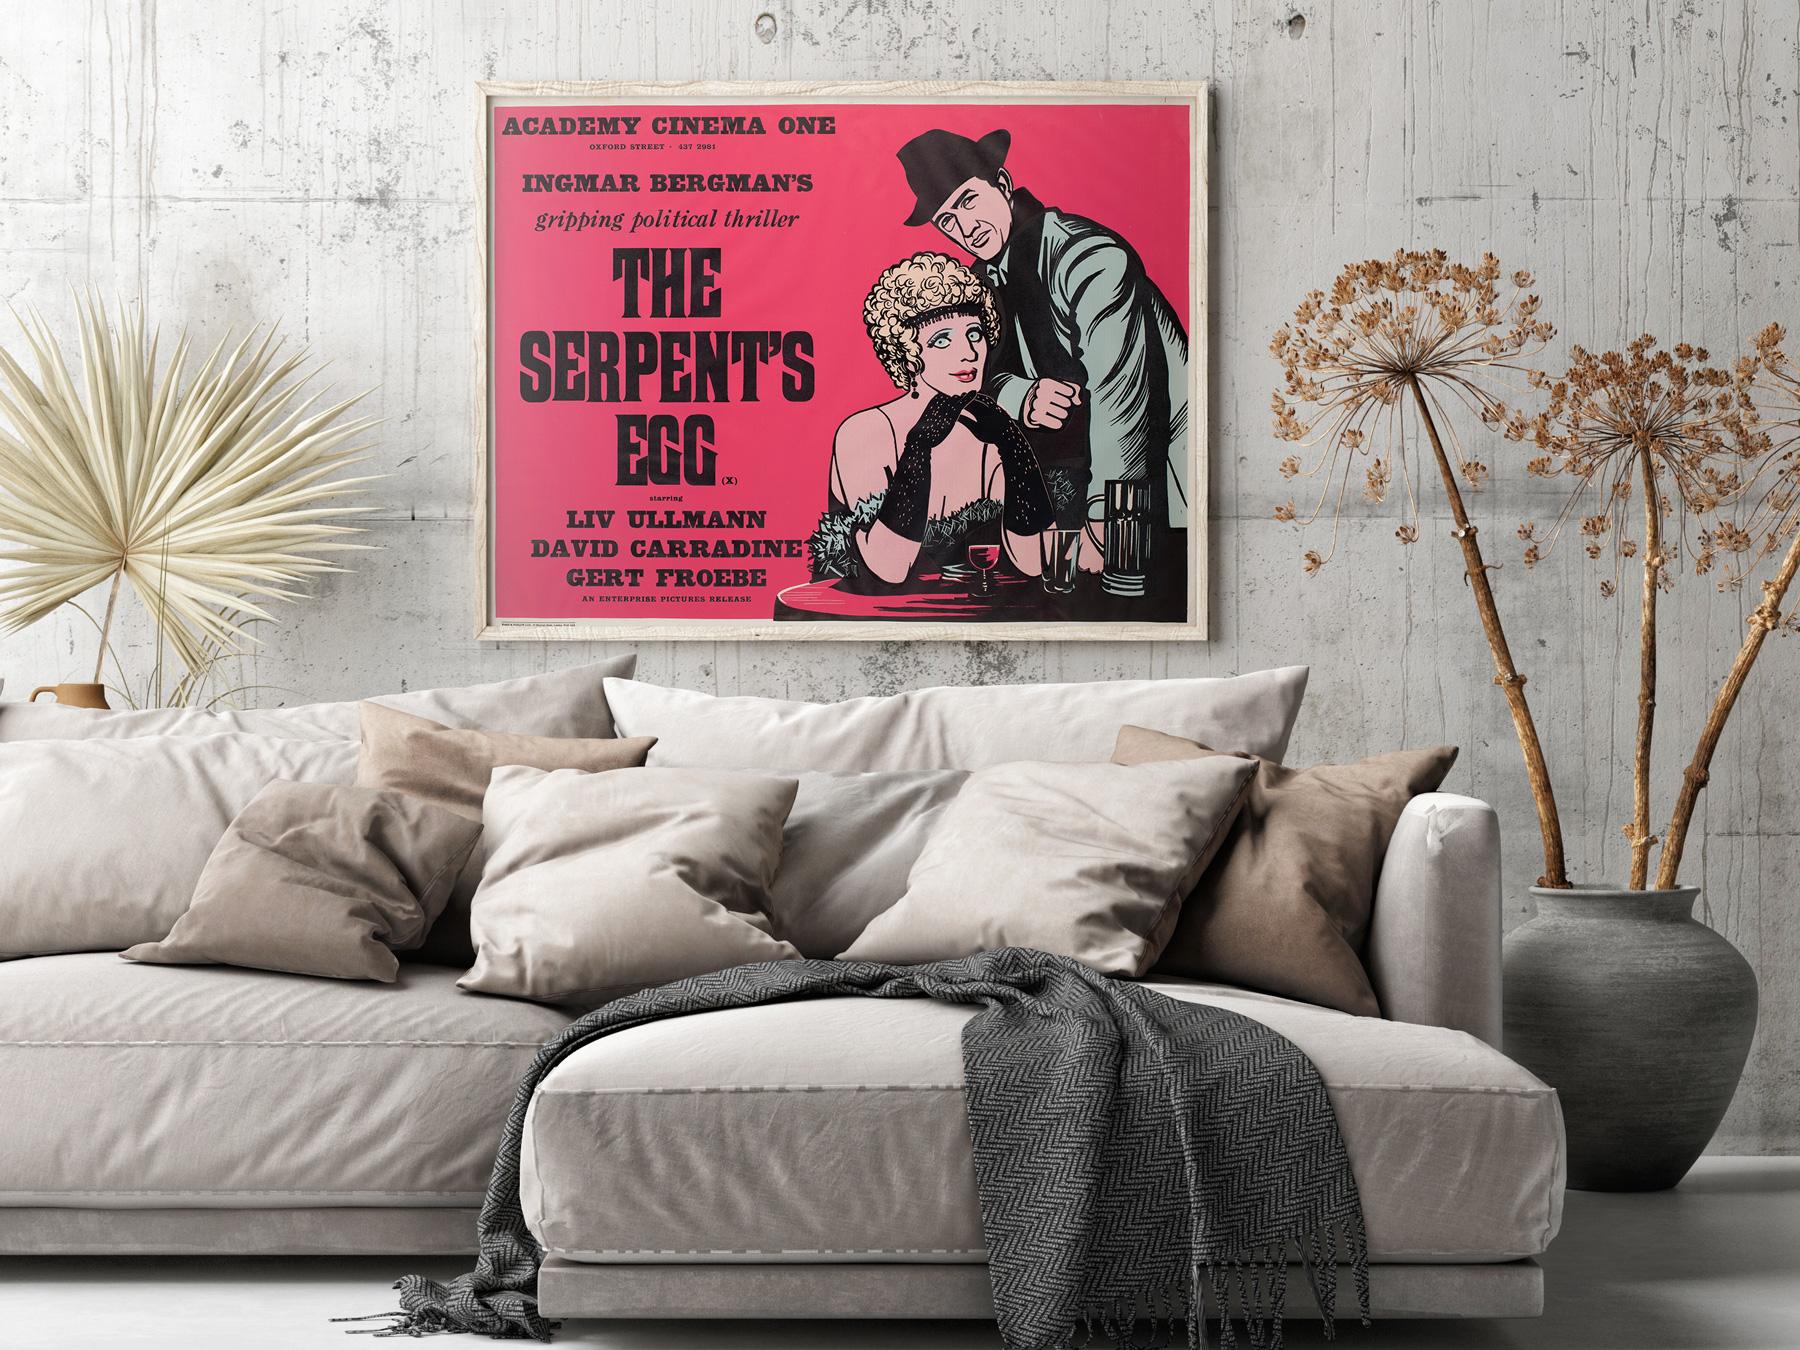 Fabulous original Academy Cinema film poster for Ingmar Bergman's thriller The Serpent's Egg. Design by Peter Strausfeld.

Strausfeld, born in Cologne, came to England in 1938. Whilst interned on the Isle of Man during the Second World War, he